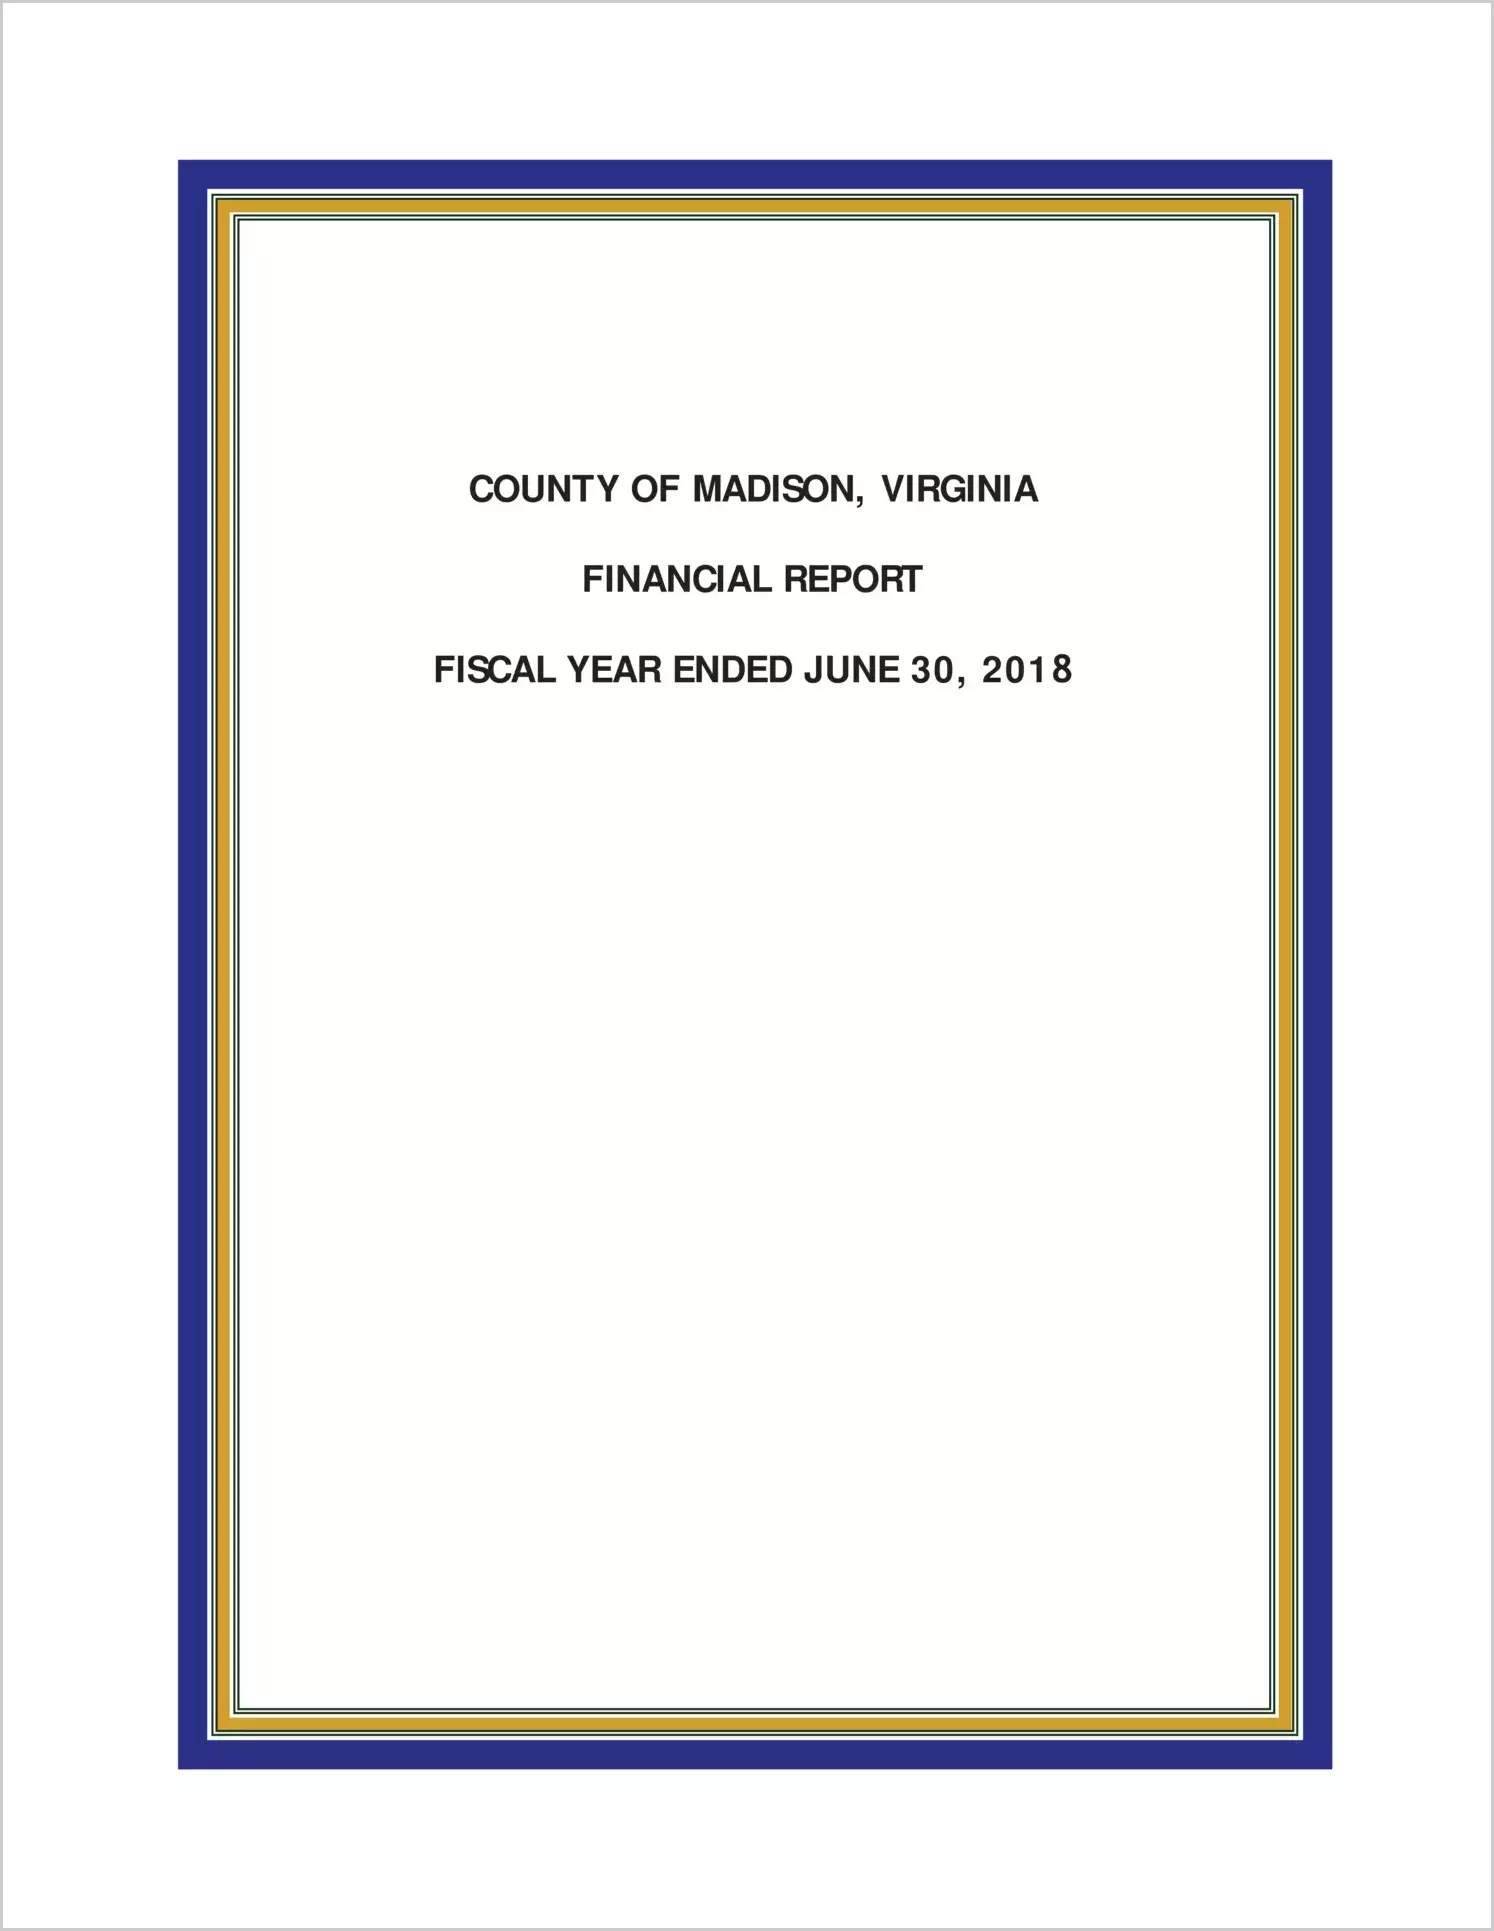 2018 Annual Financial Report for County of Madison